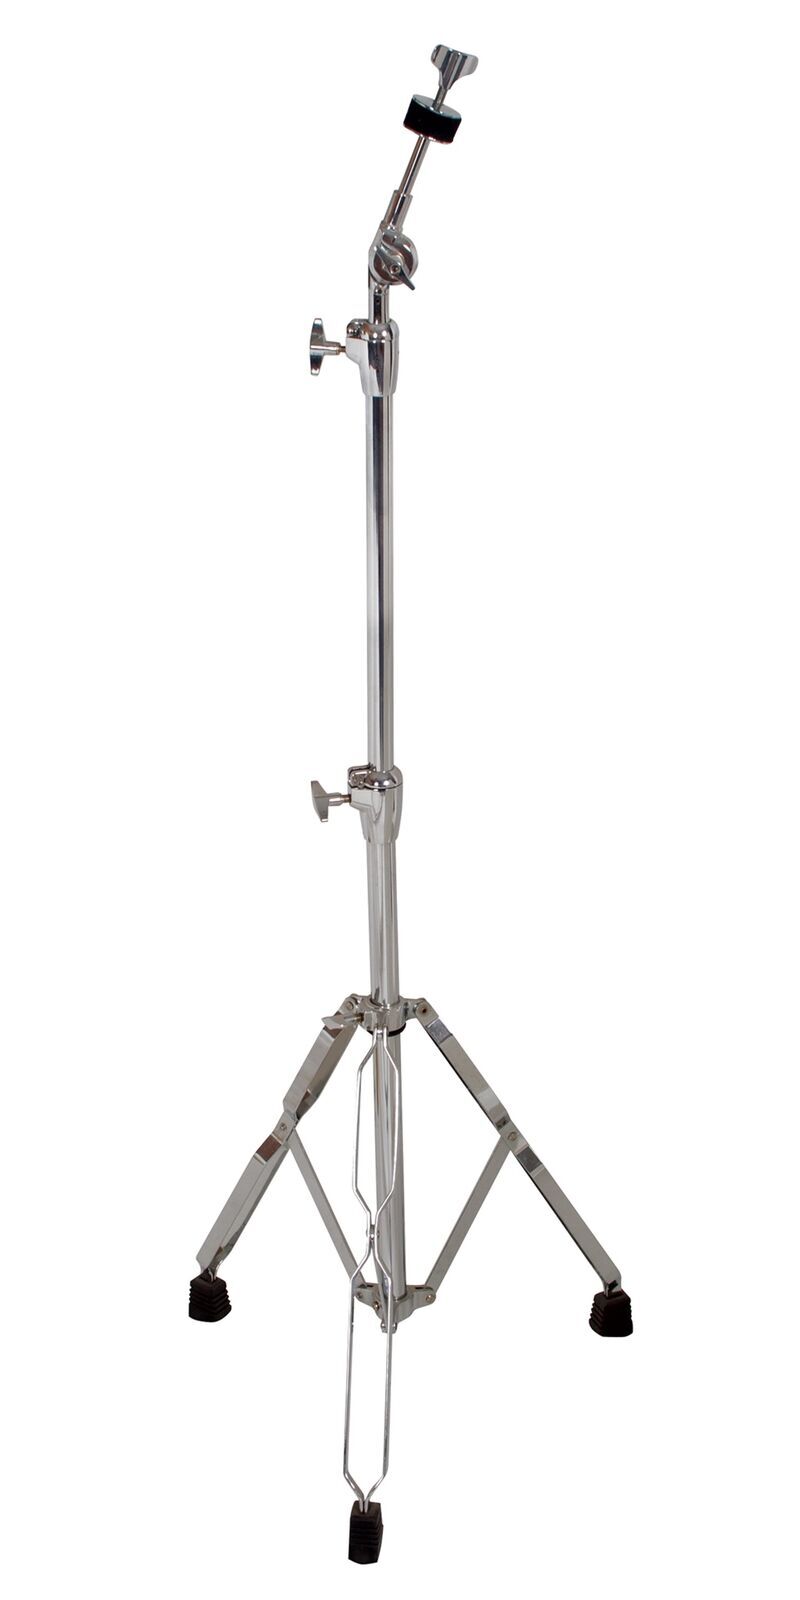 DXP Cymbal Stand 550 Series, Heavy Duty, Double Braced, Chrome Finish